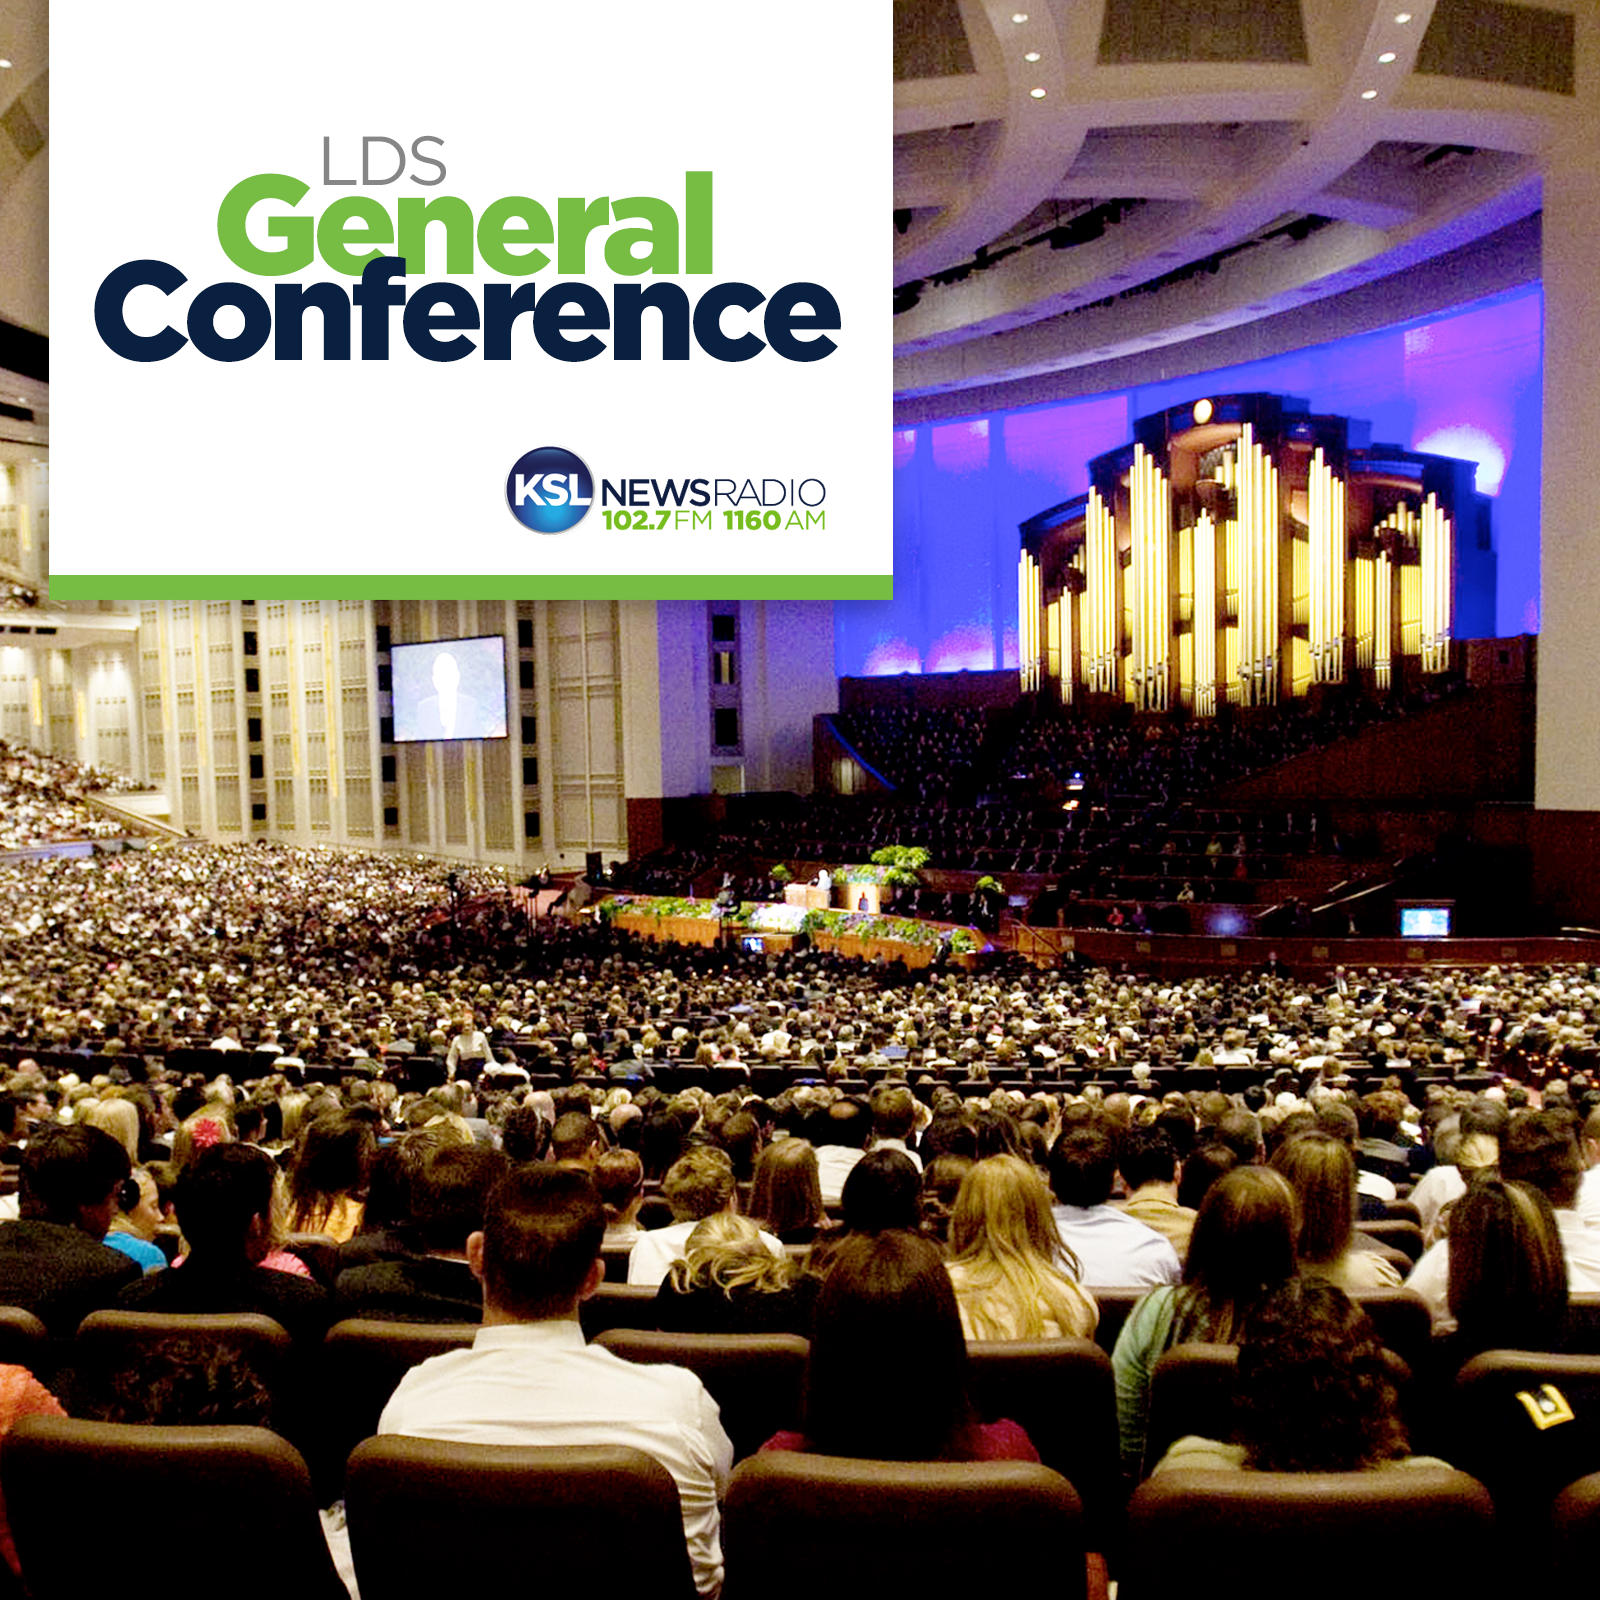 Saturday morning LDS General Conference session - September 30, 2017